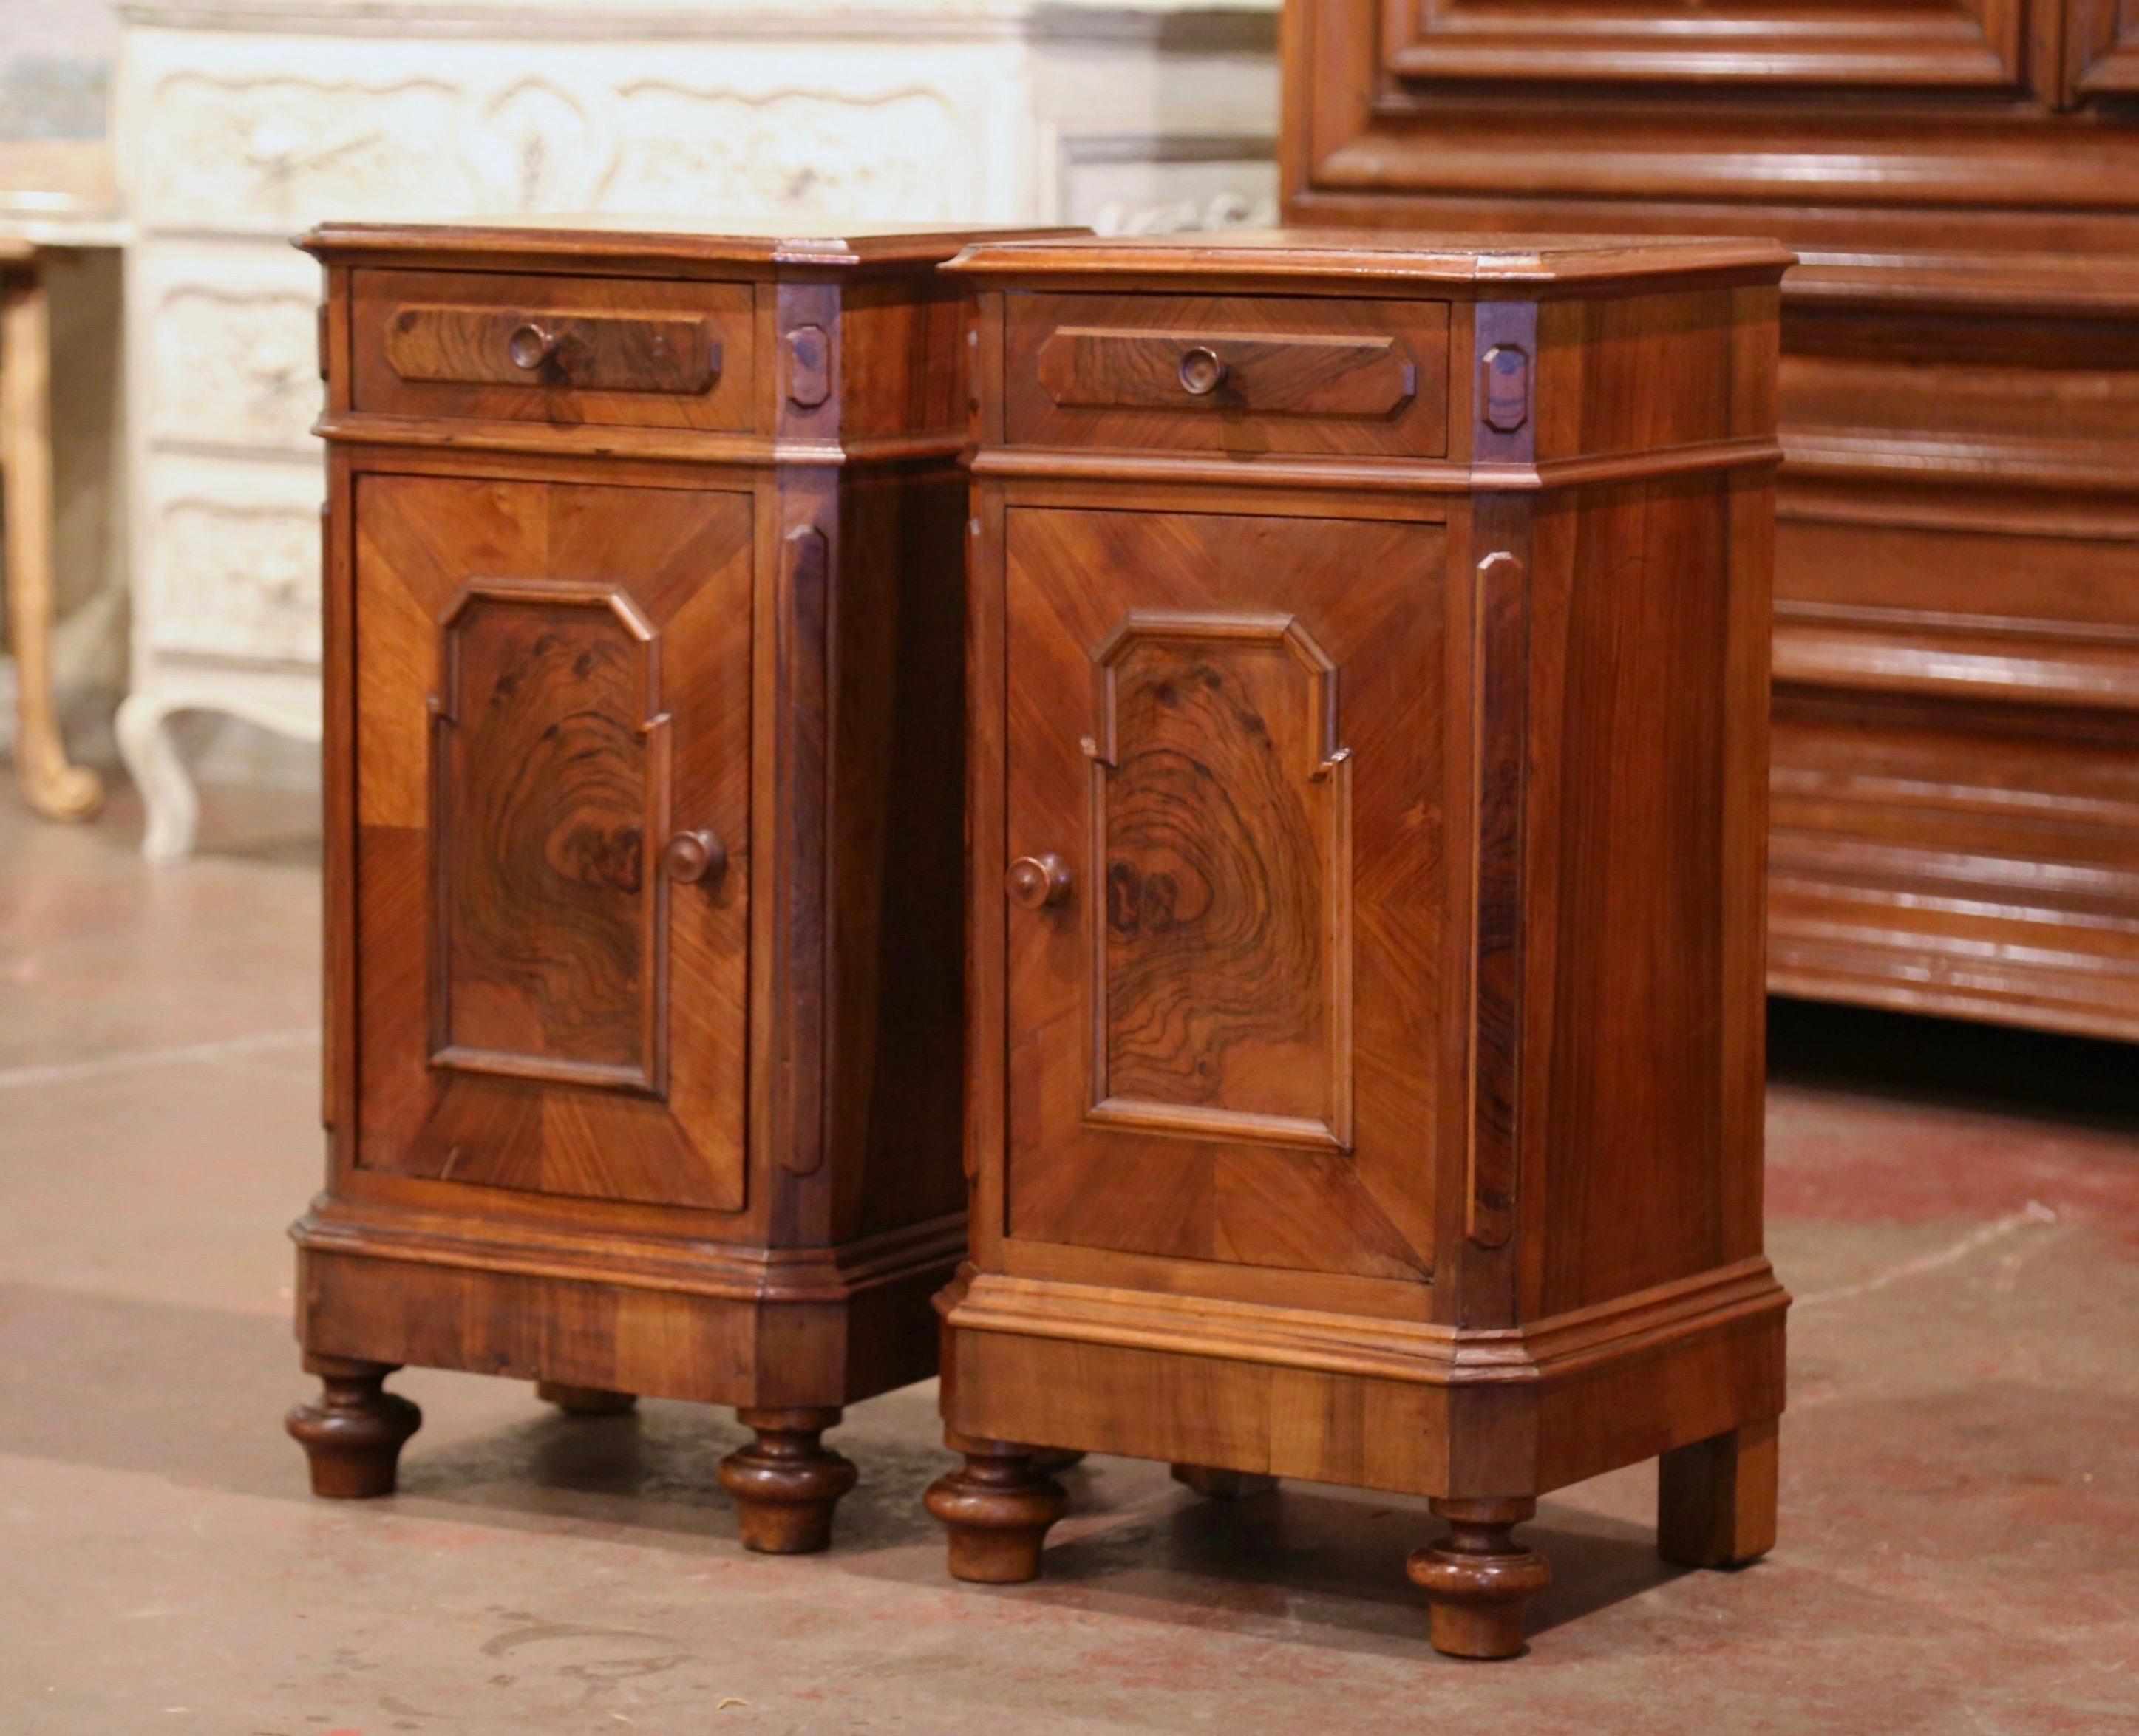 Add surface space in your bedroom with this elegant pair of antique fruitwood nightstands. Crafted in France circa 1860 and made of burl and walnut wood with veneer decor, each Classic cabinet stands on bun feet, and features a single drawer with